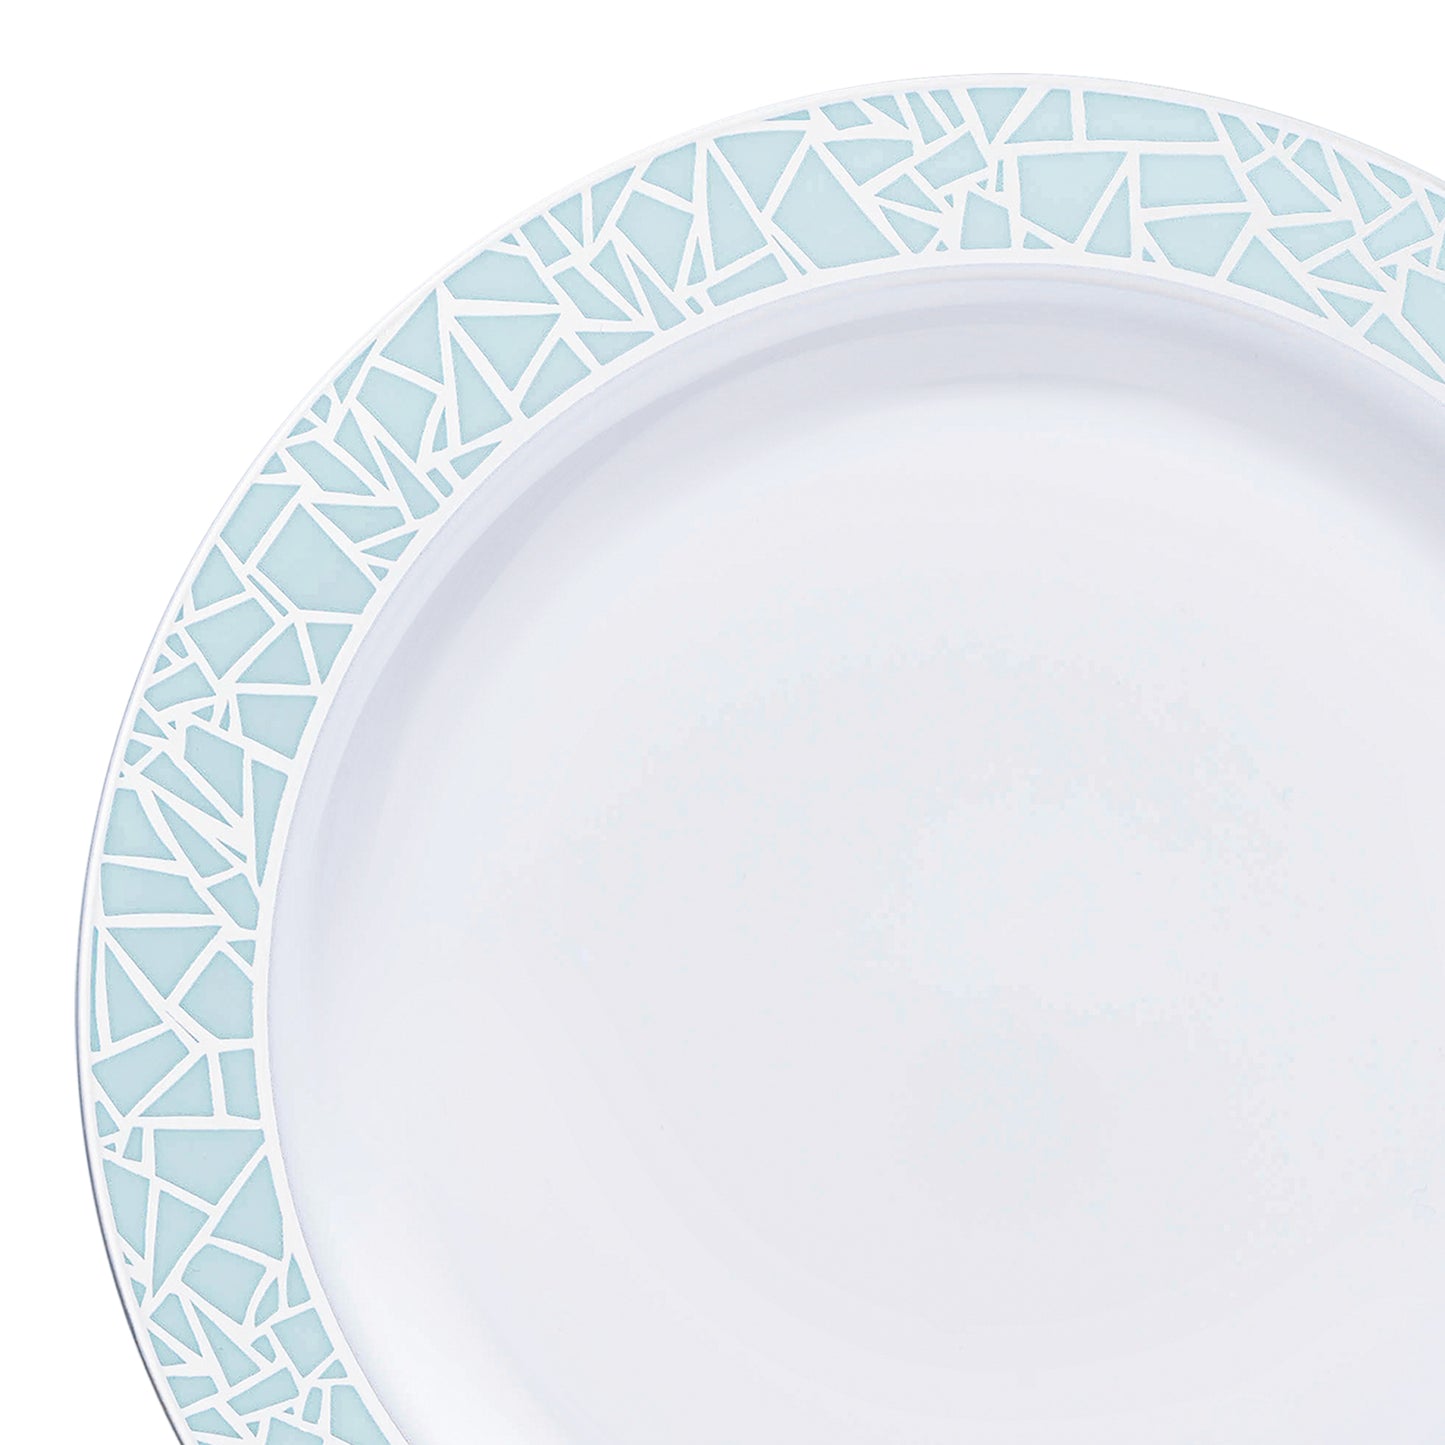 White with Turquoise Blue and Silver Mosaic Rim Round Plastic Appetizer/Salad Plates (7.5") | The Kaya Collection